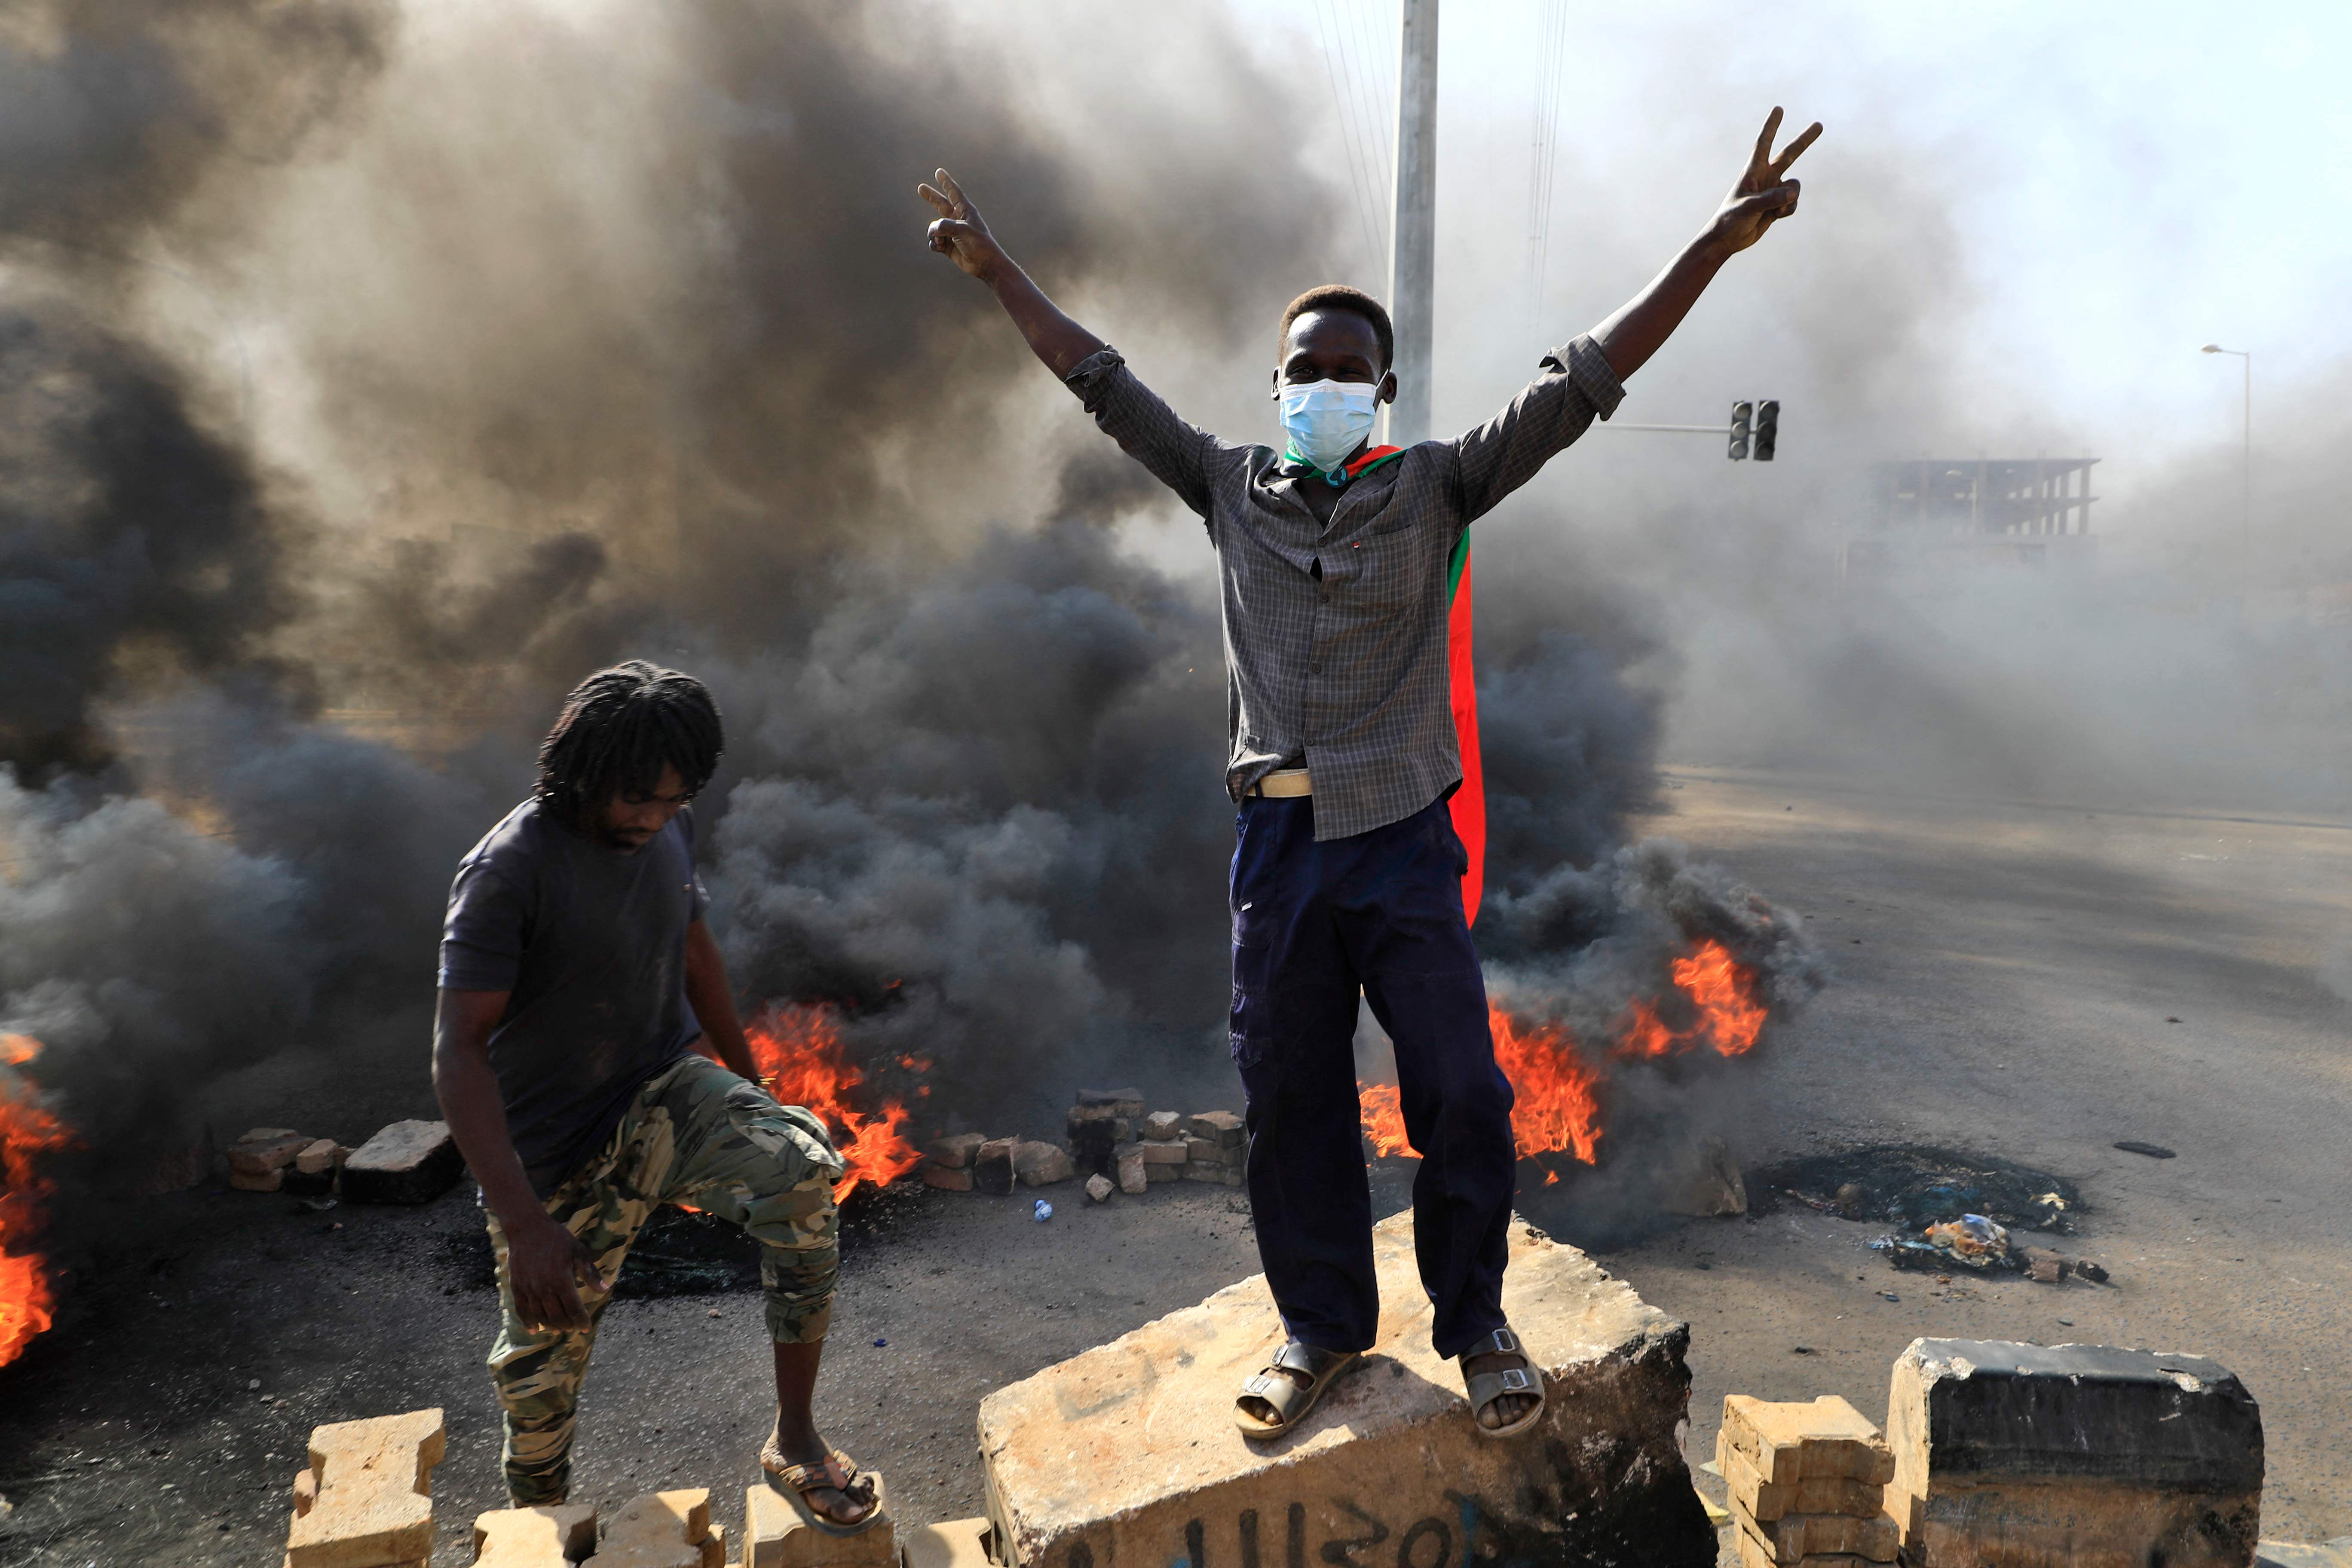 Sudanese protesters burn tyres to block a road in Khartoum on Monday